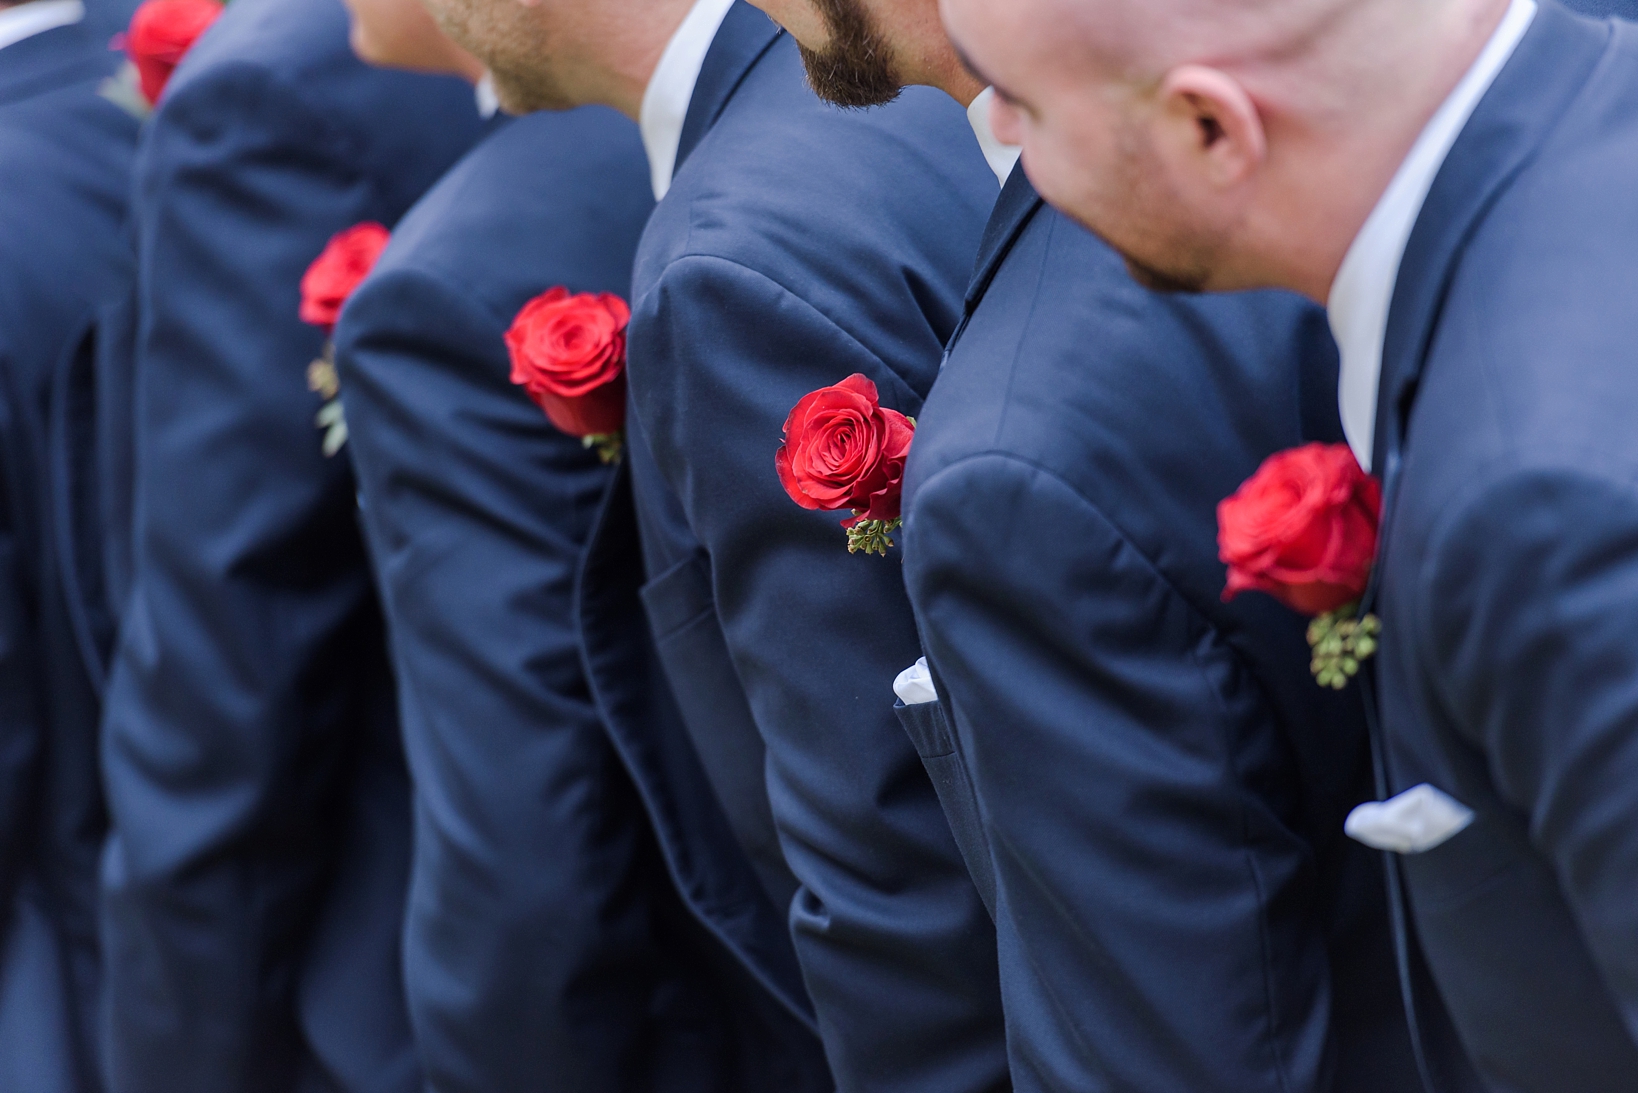 A row of red roses along the groomsmen's lapels by Sarah & Ben Photography. Check out all our work at www.sarahben.com